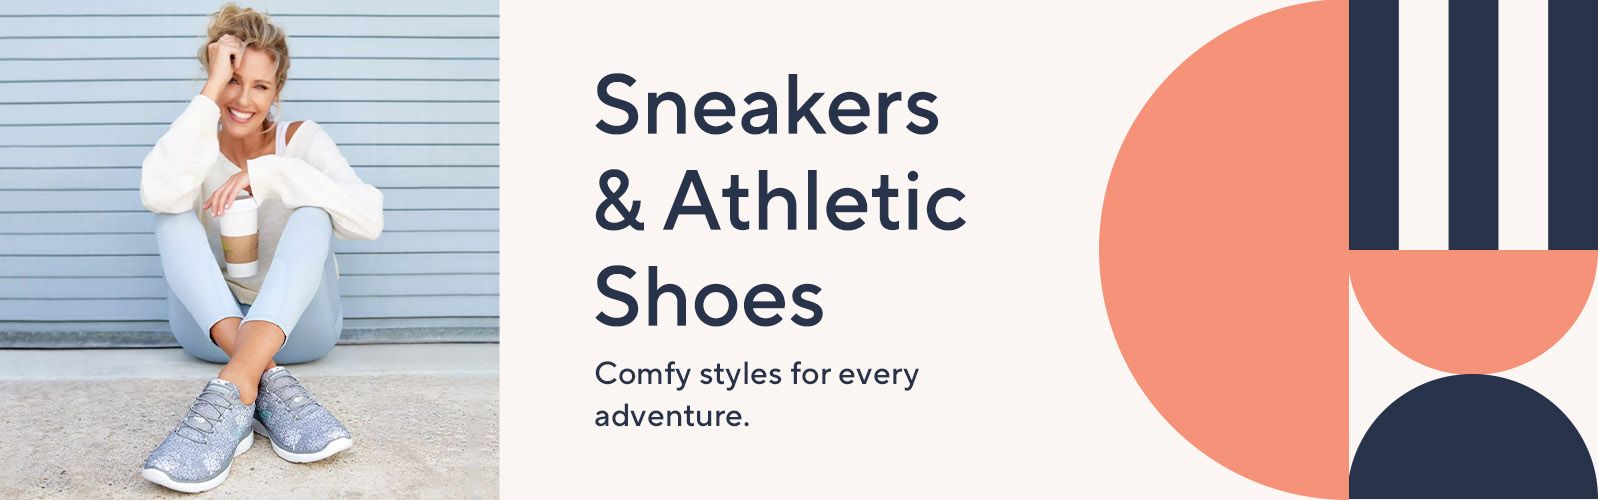 Sneakers & Athletic Shoes: Comfy styles for every adventure.